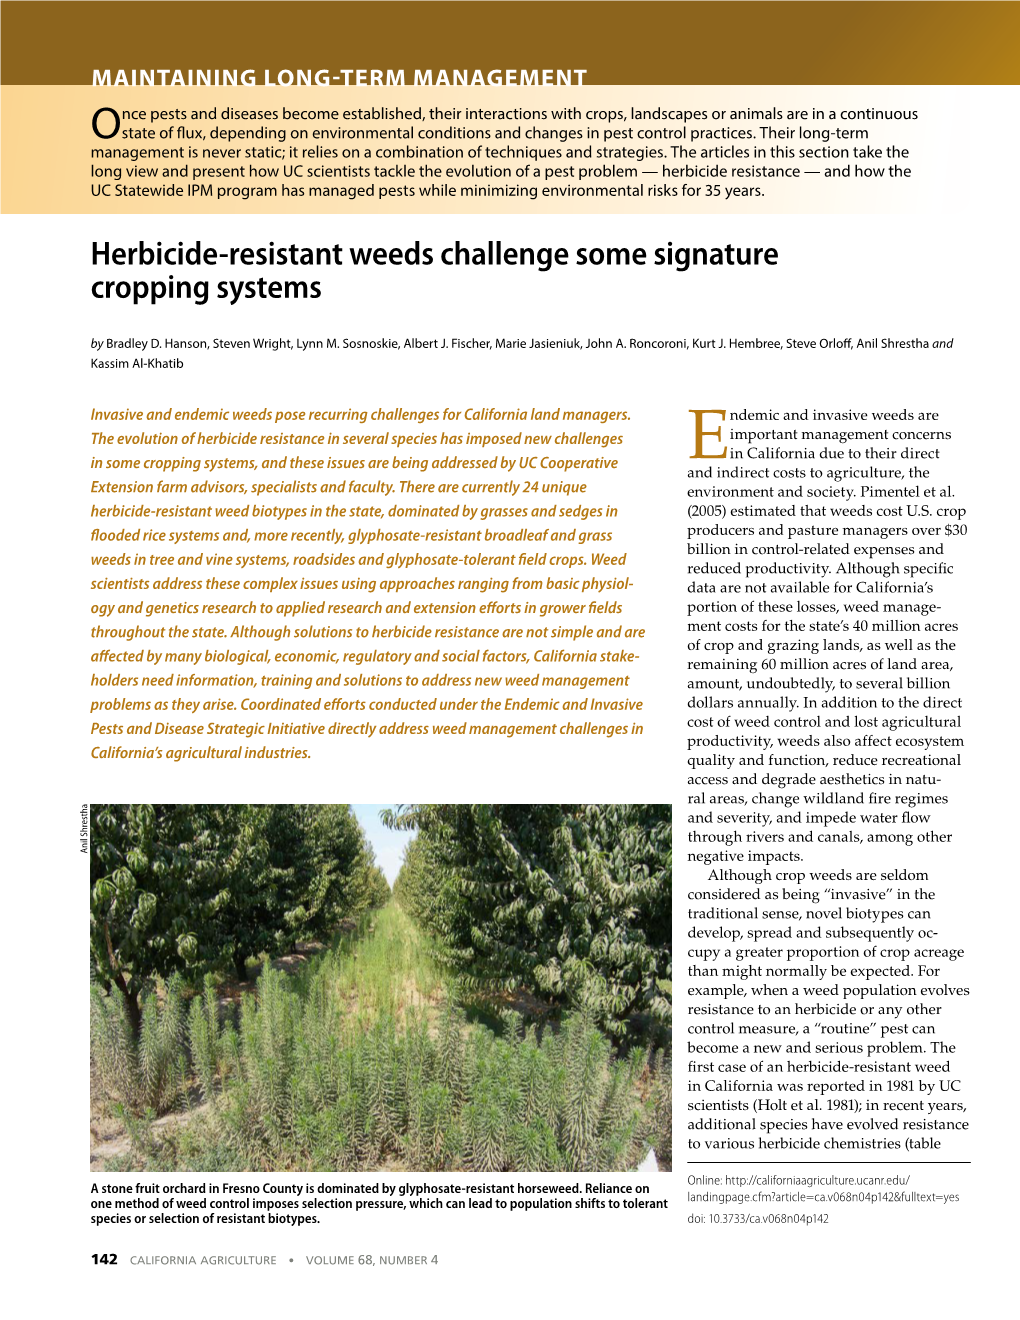 Herbicide-Resistant Weeds Challenge Some Signature Cropping Systems